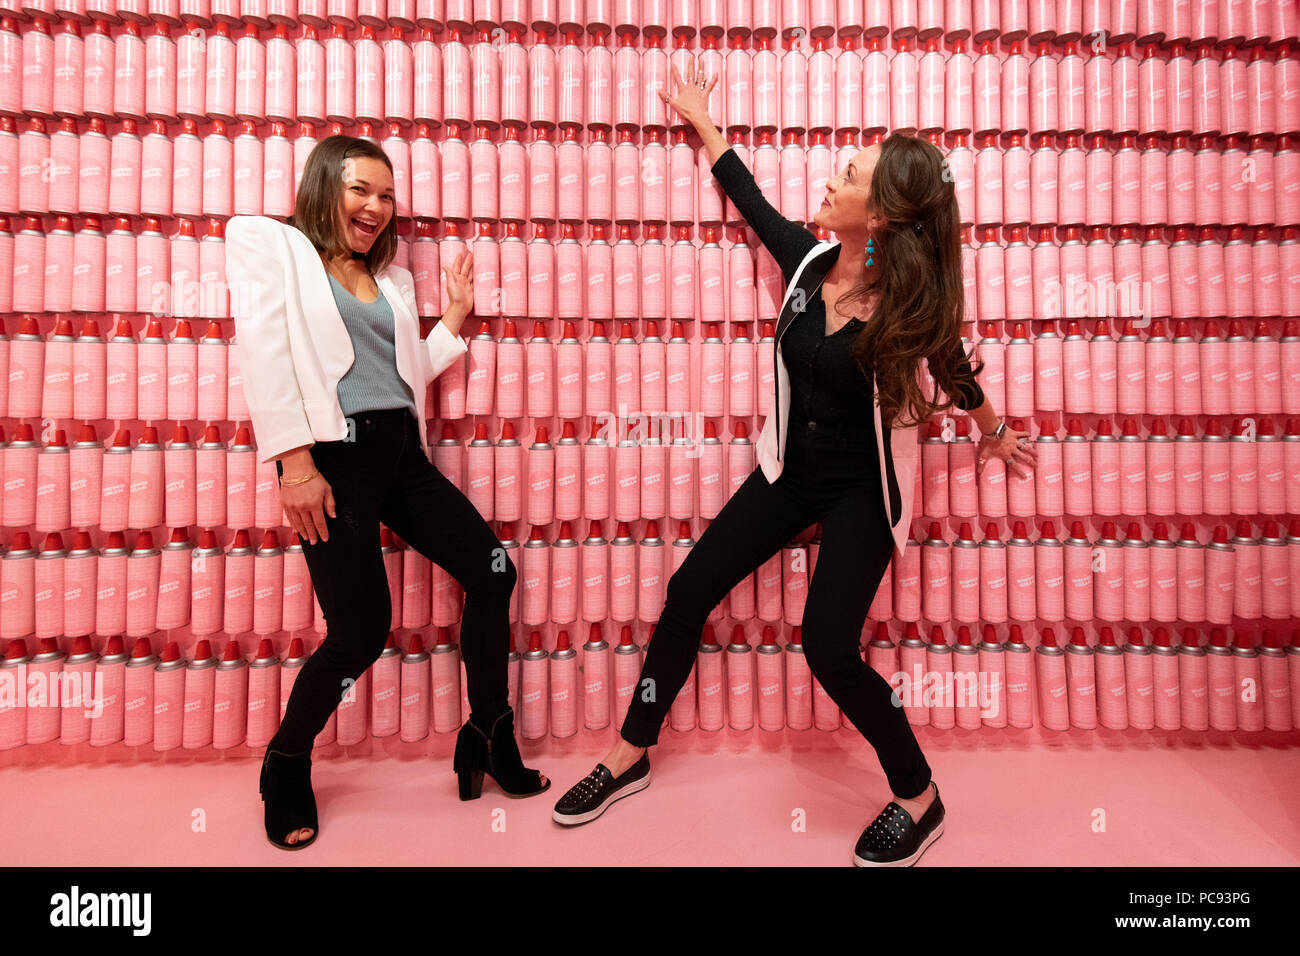 Two women stand by a pink wall of whipped cream cans in the Museum of Ice Cream in San Francisco, California. Stock Photo